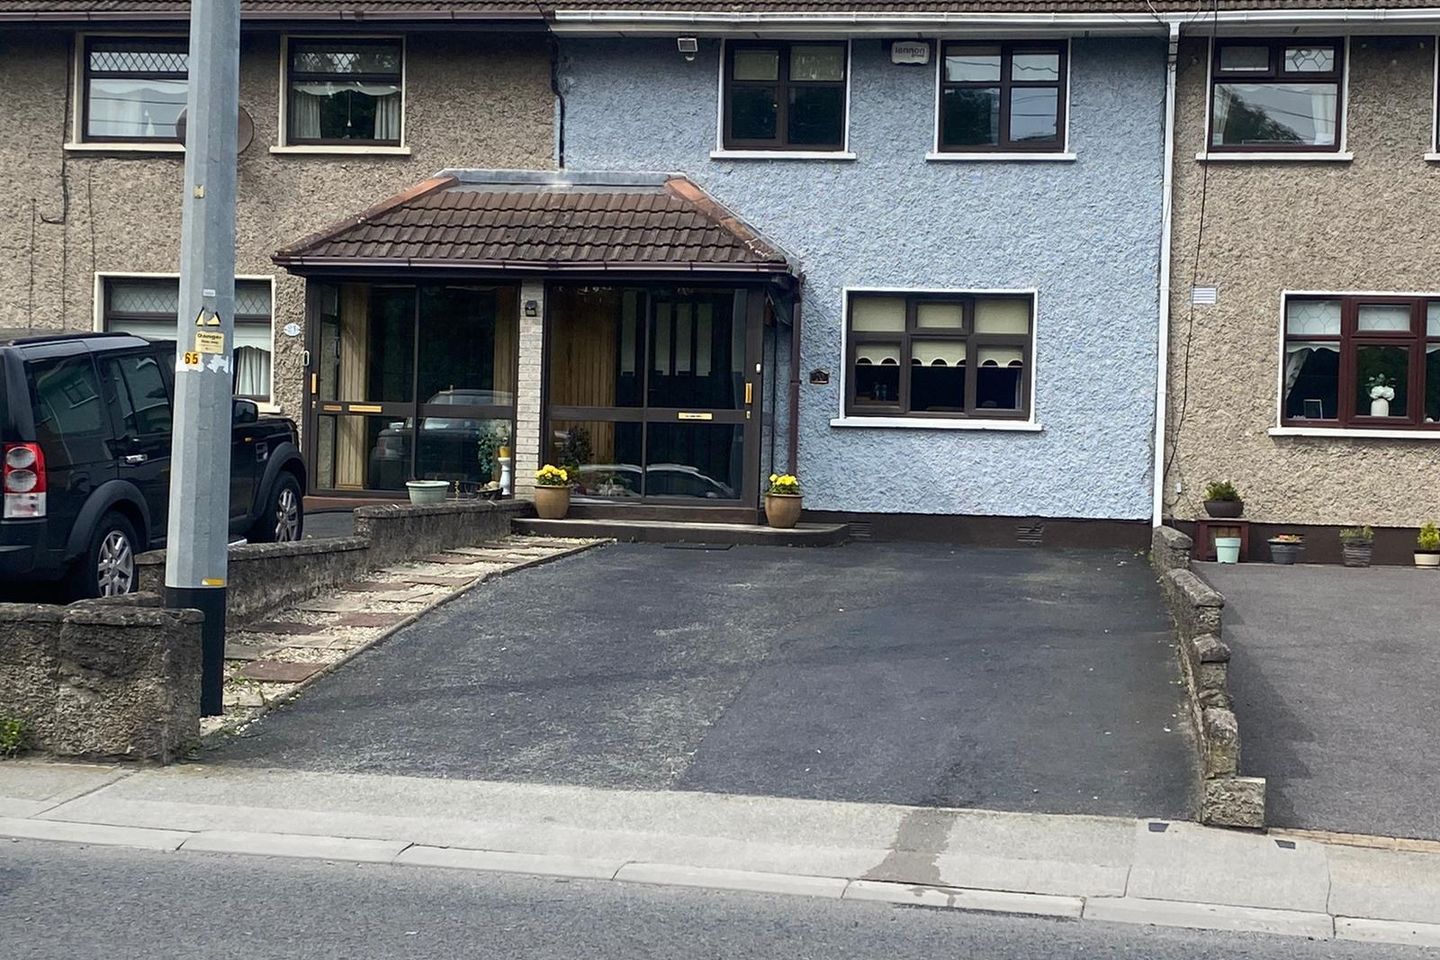 20 Ballsgrove Donore Road, Drogheda, Co. Louth, A92YD8Y